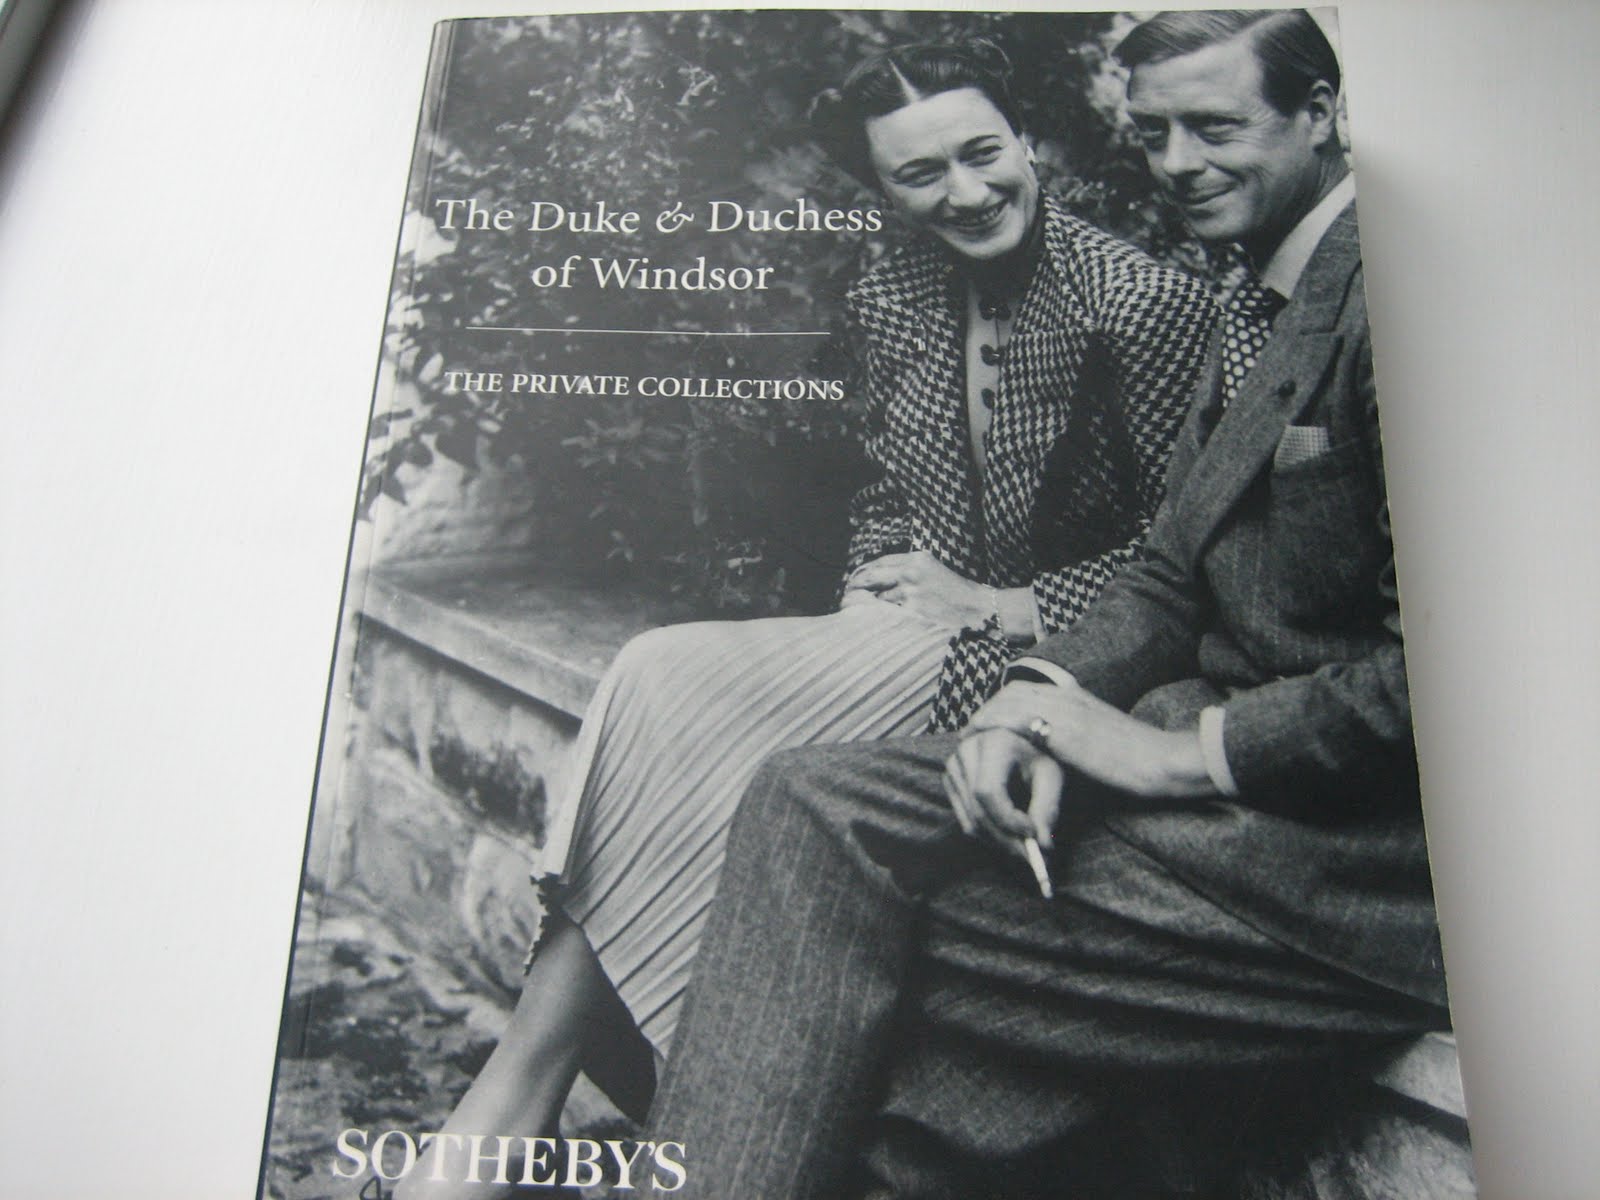 Sold at Auction: Three books on Fashion